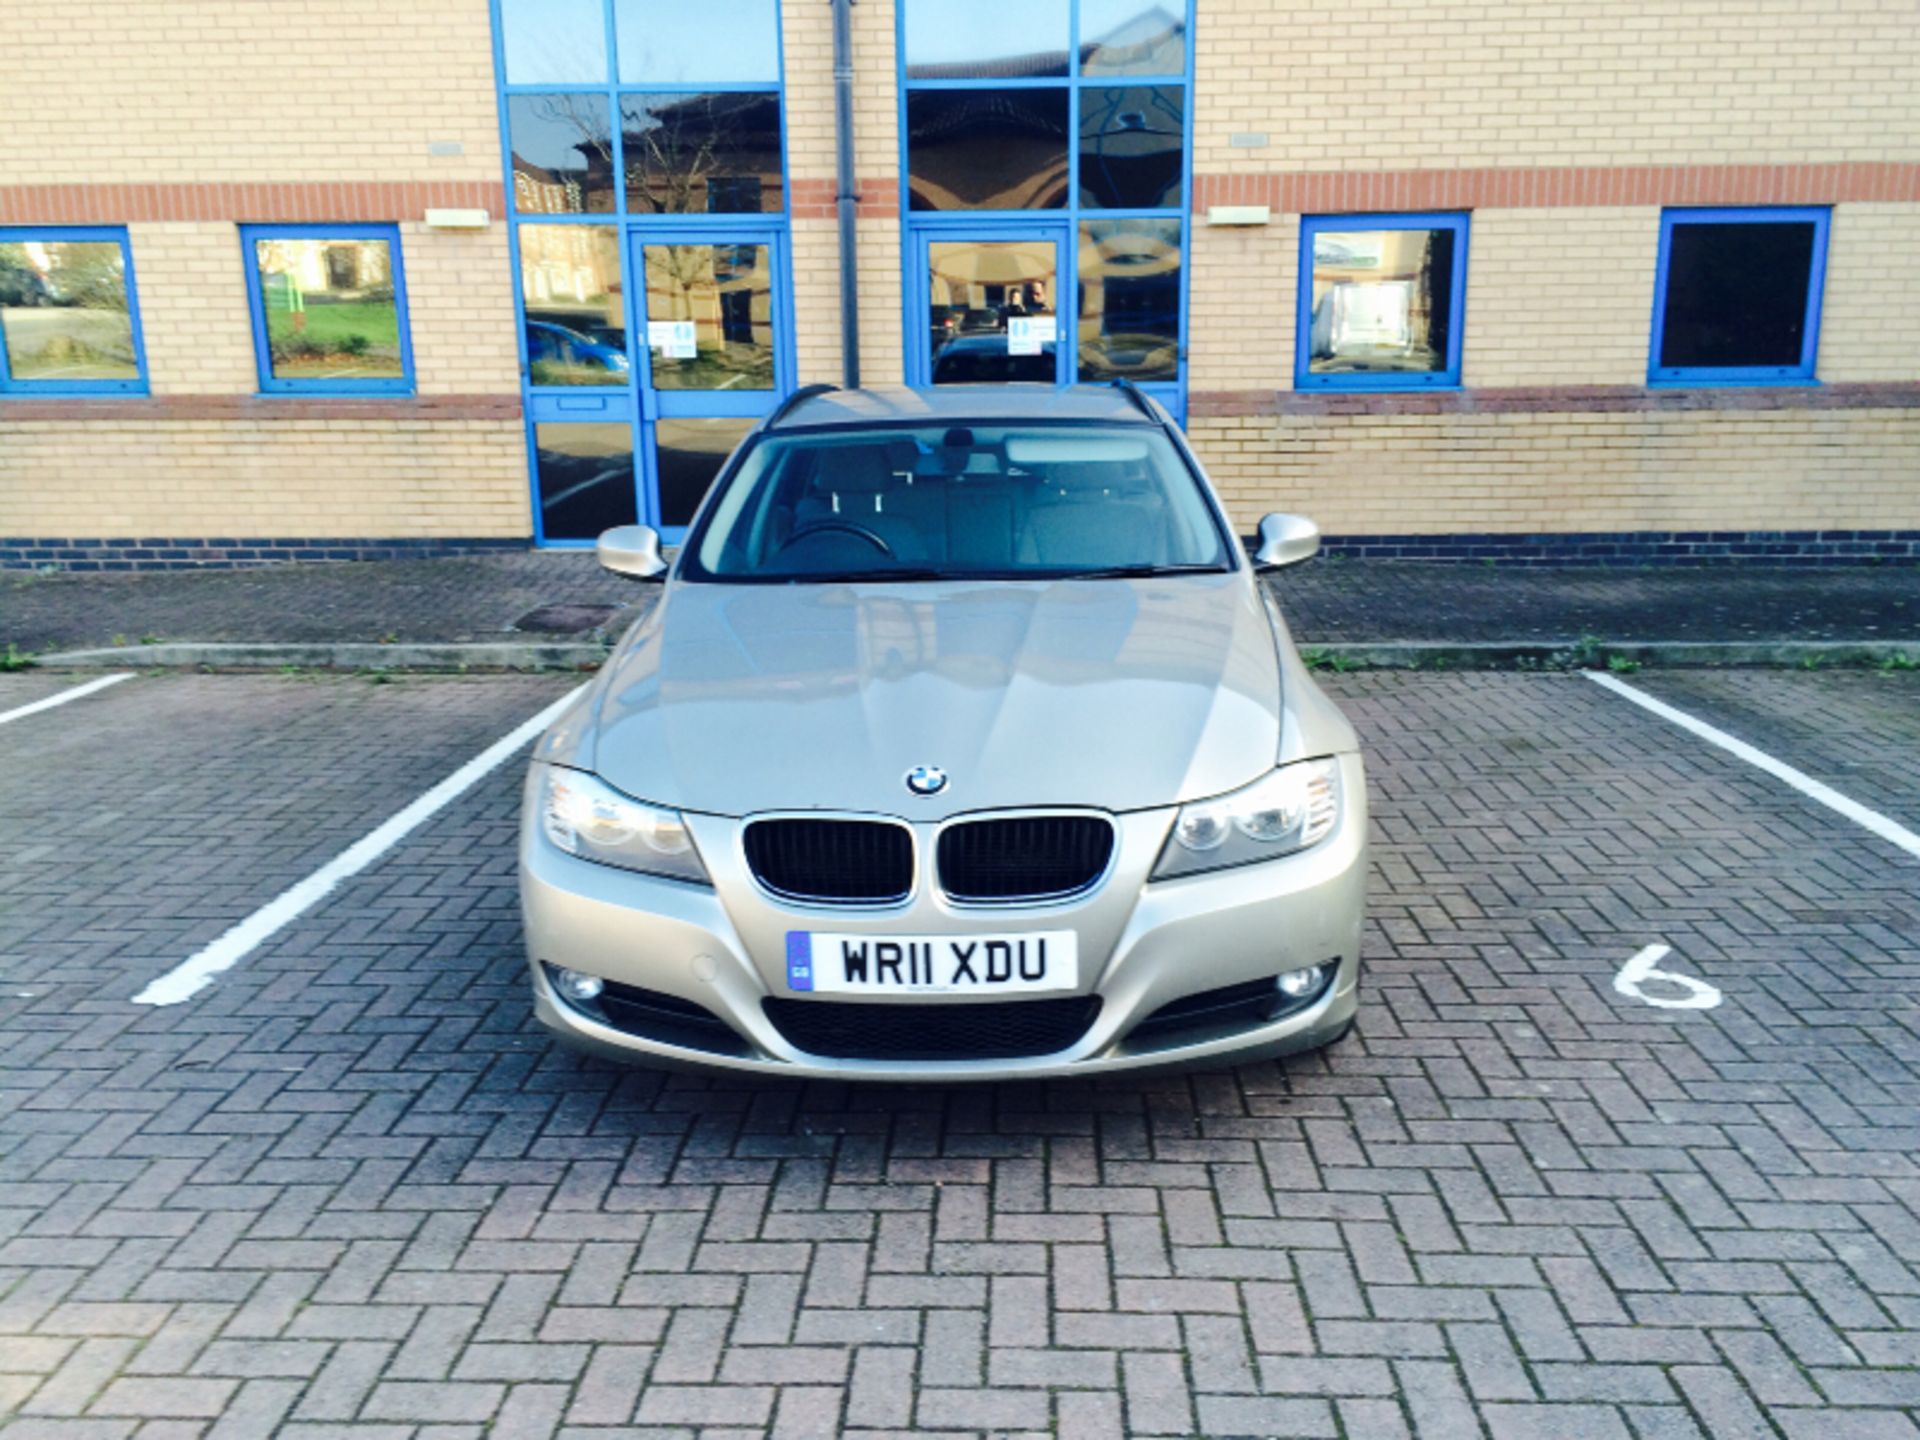 ON SALE ! BMW 318D DIESEL (2011 - 11 REG) 'SERVICE HISTORY BY BMW' START / STOP - AIR CON - EURO 5 - Image 2 of 15